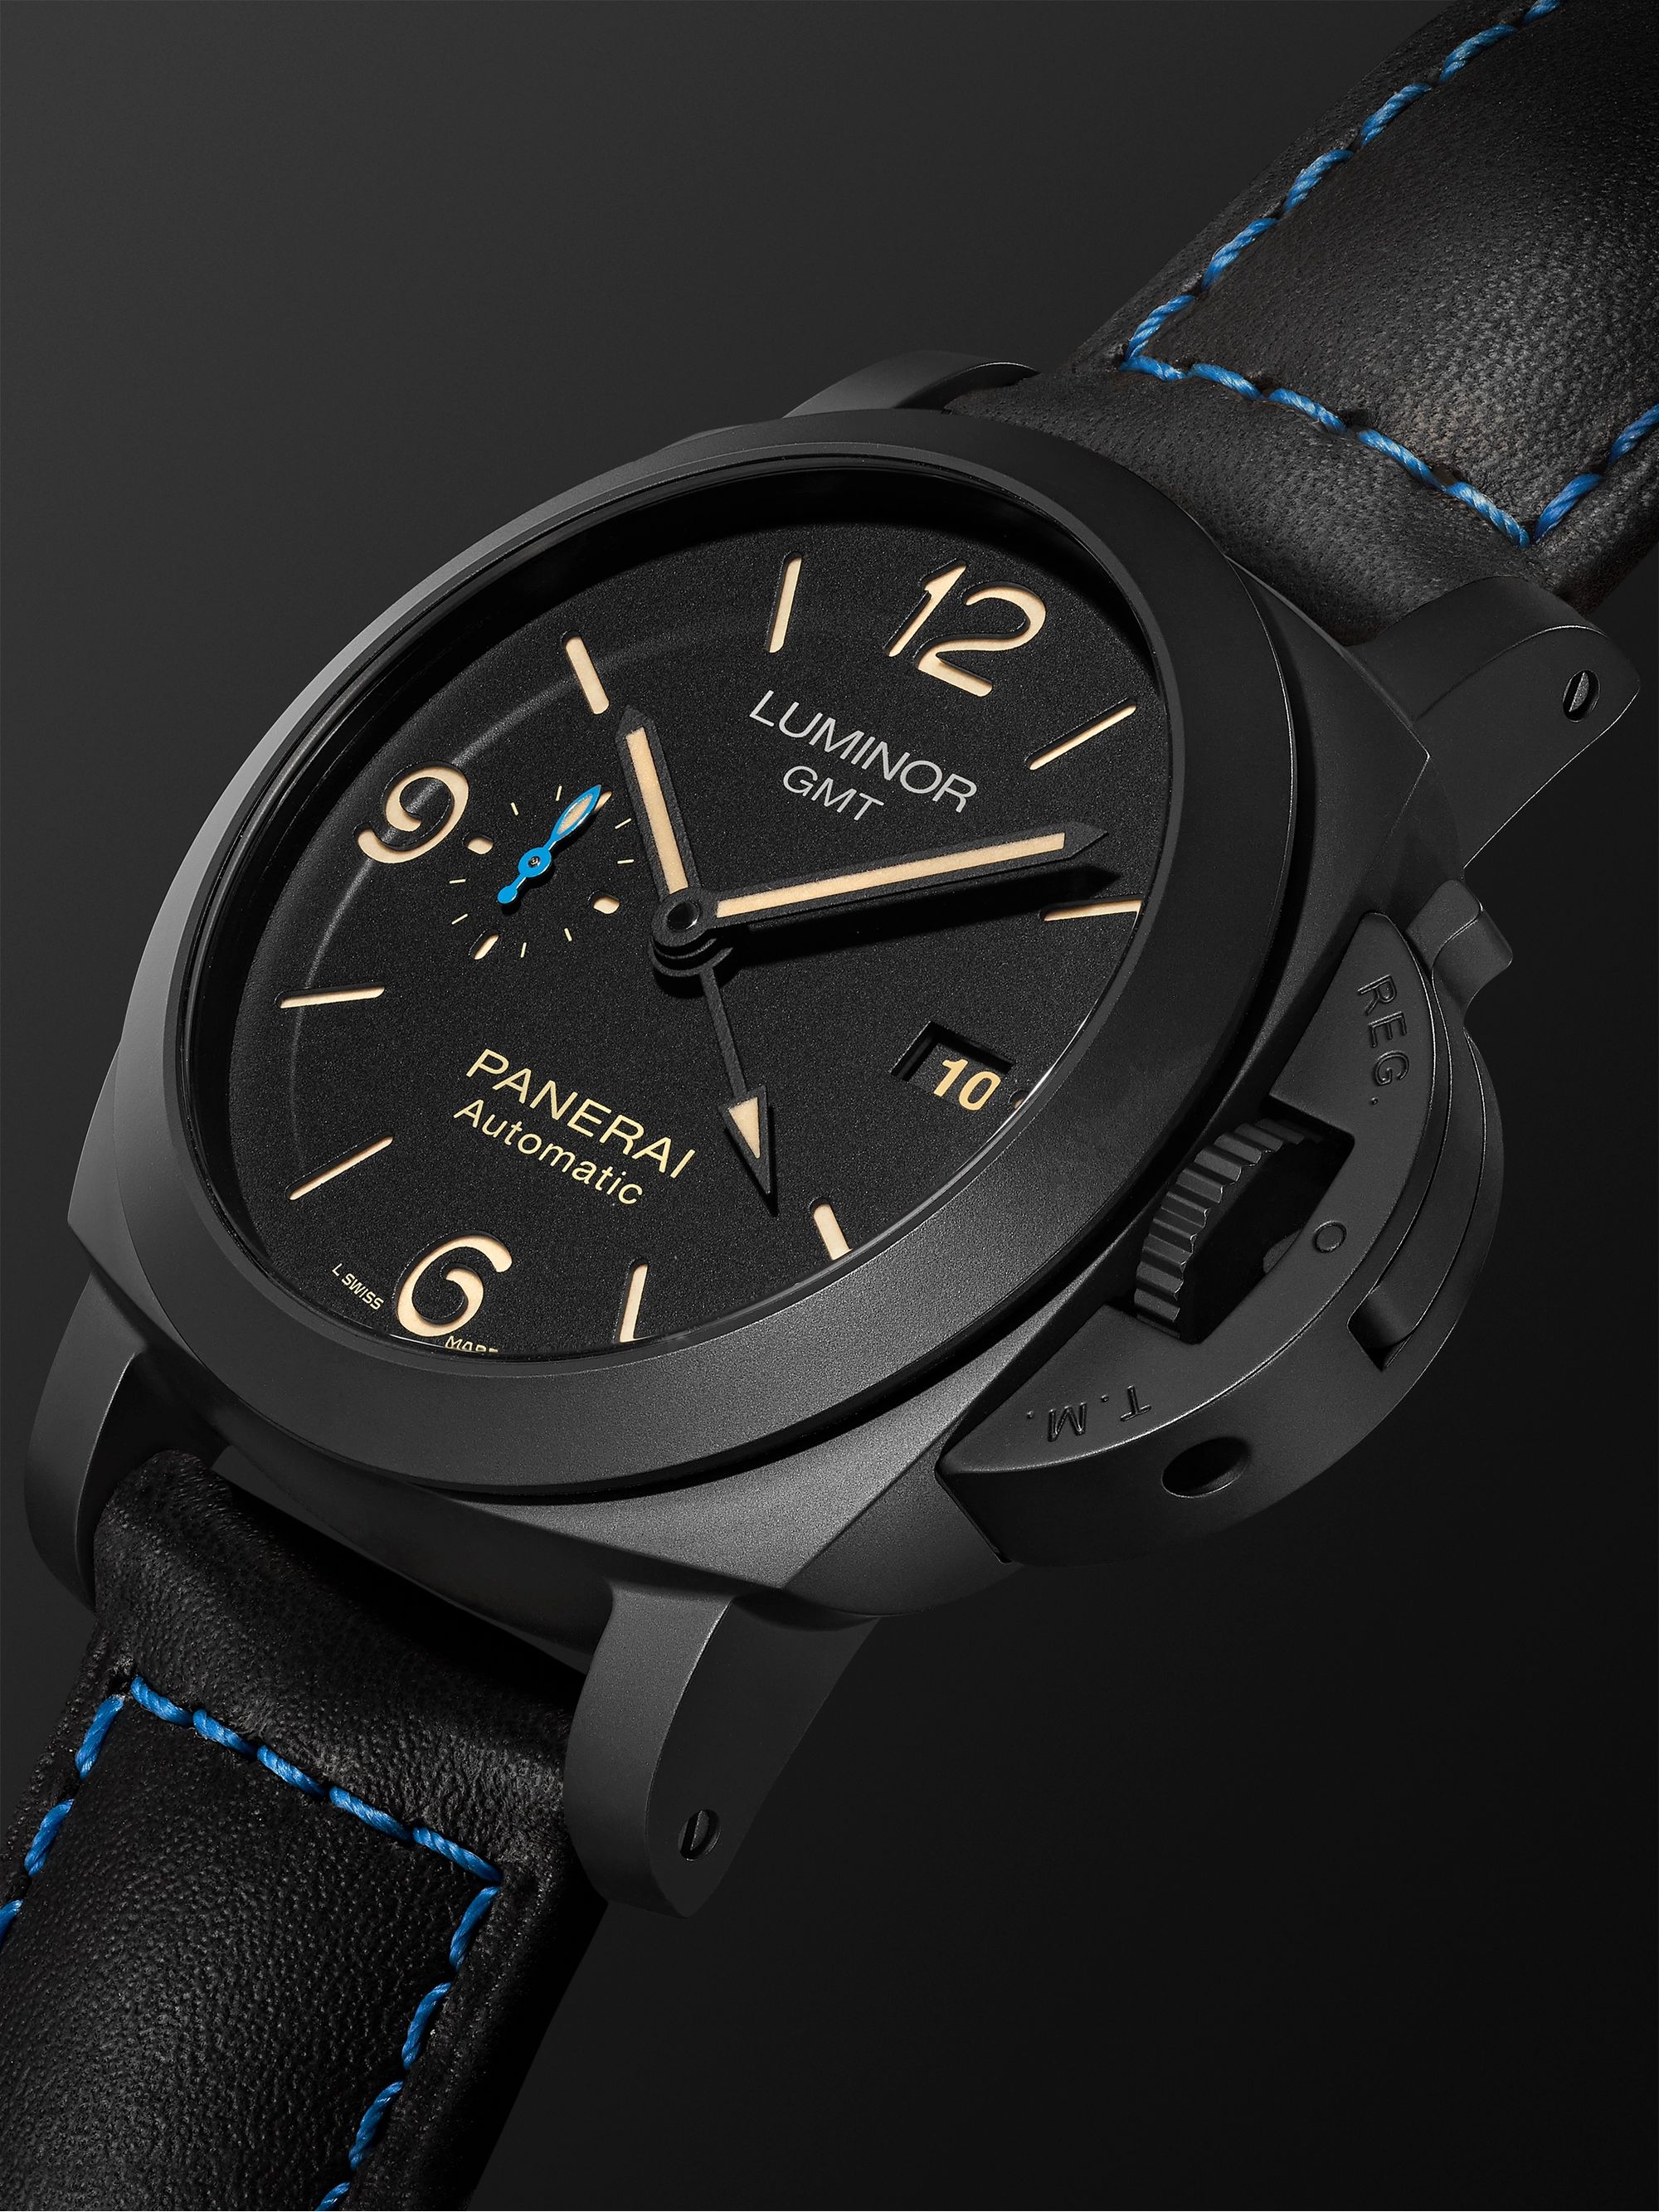 PANERAI Luminor 1950 3 Days GMT Automatic 44mm Ceramic and Leather Watch, Ref. No. PAM01441